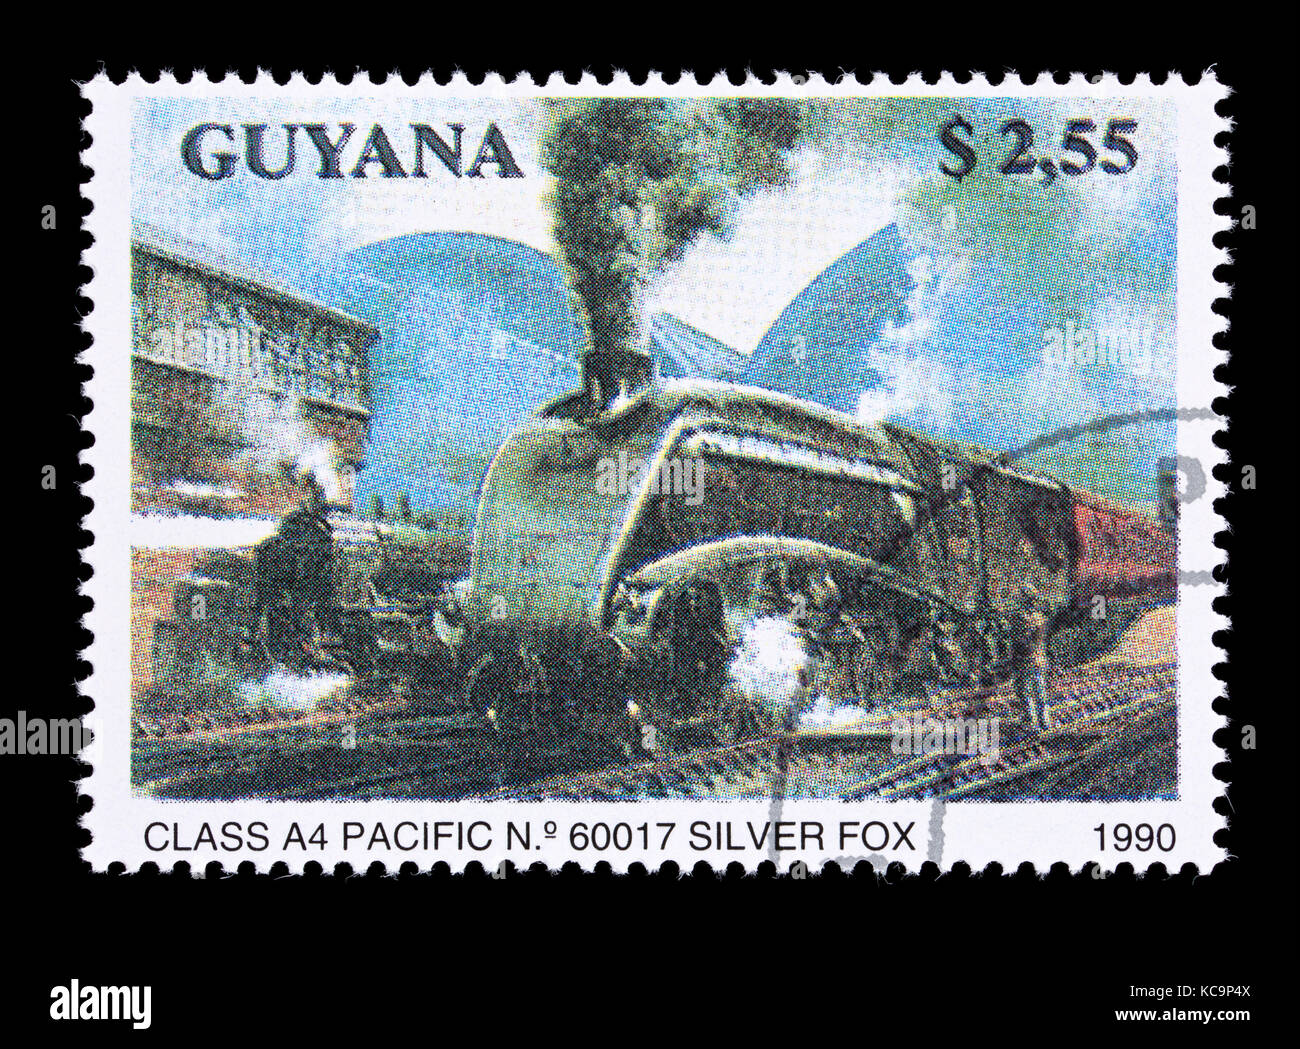 Postage stamp from Guyana depicting a Class A4 Pacific steam locomotive. Stock Photo